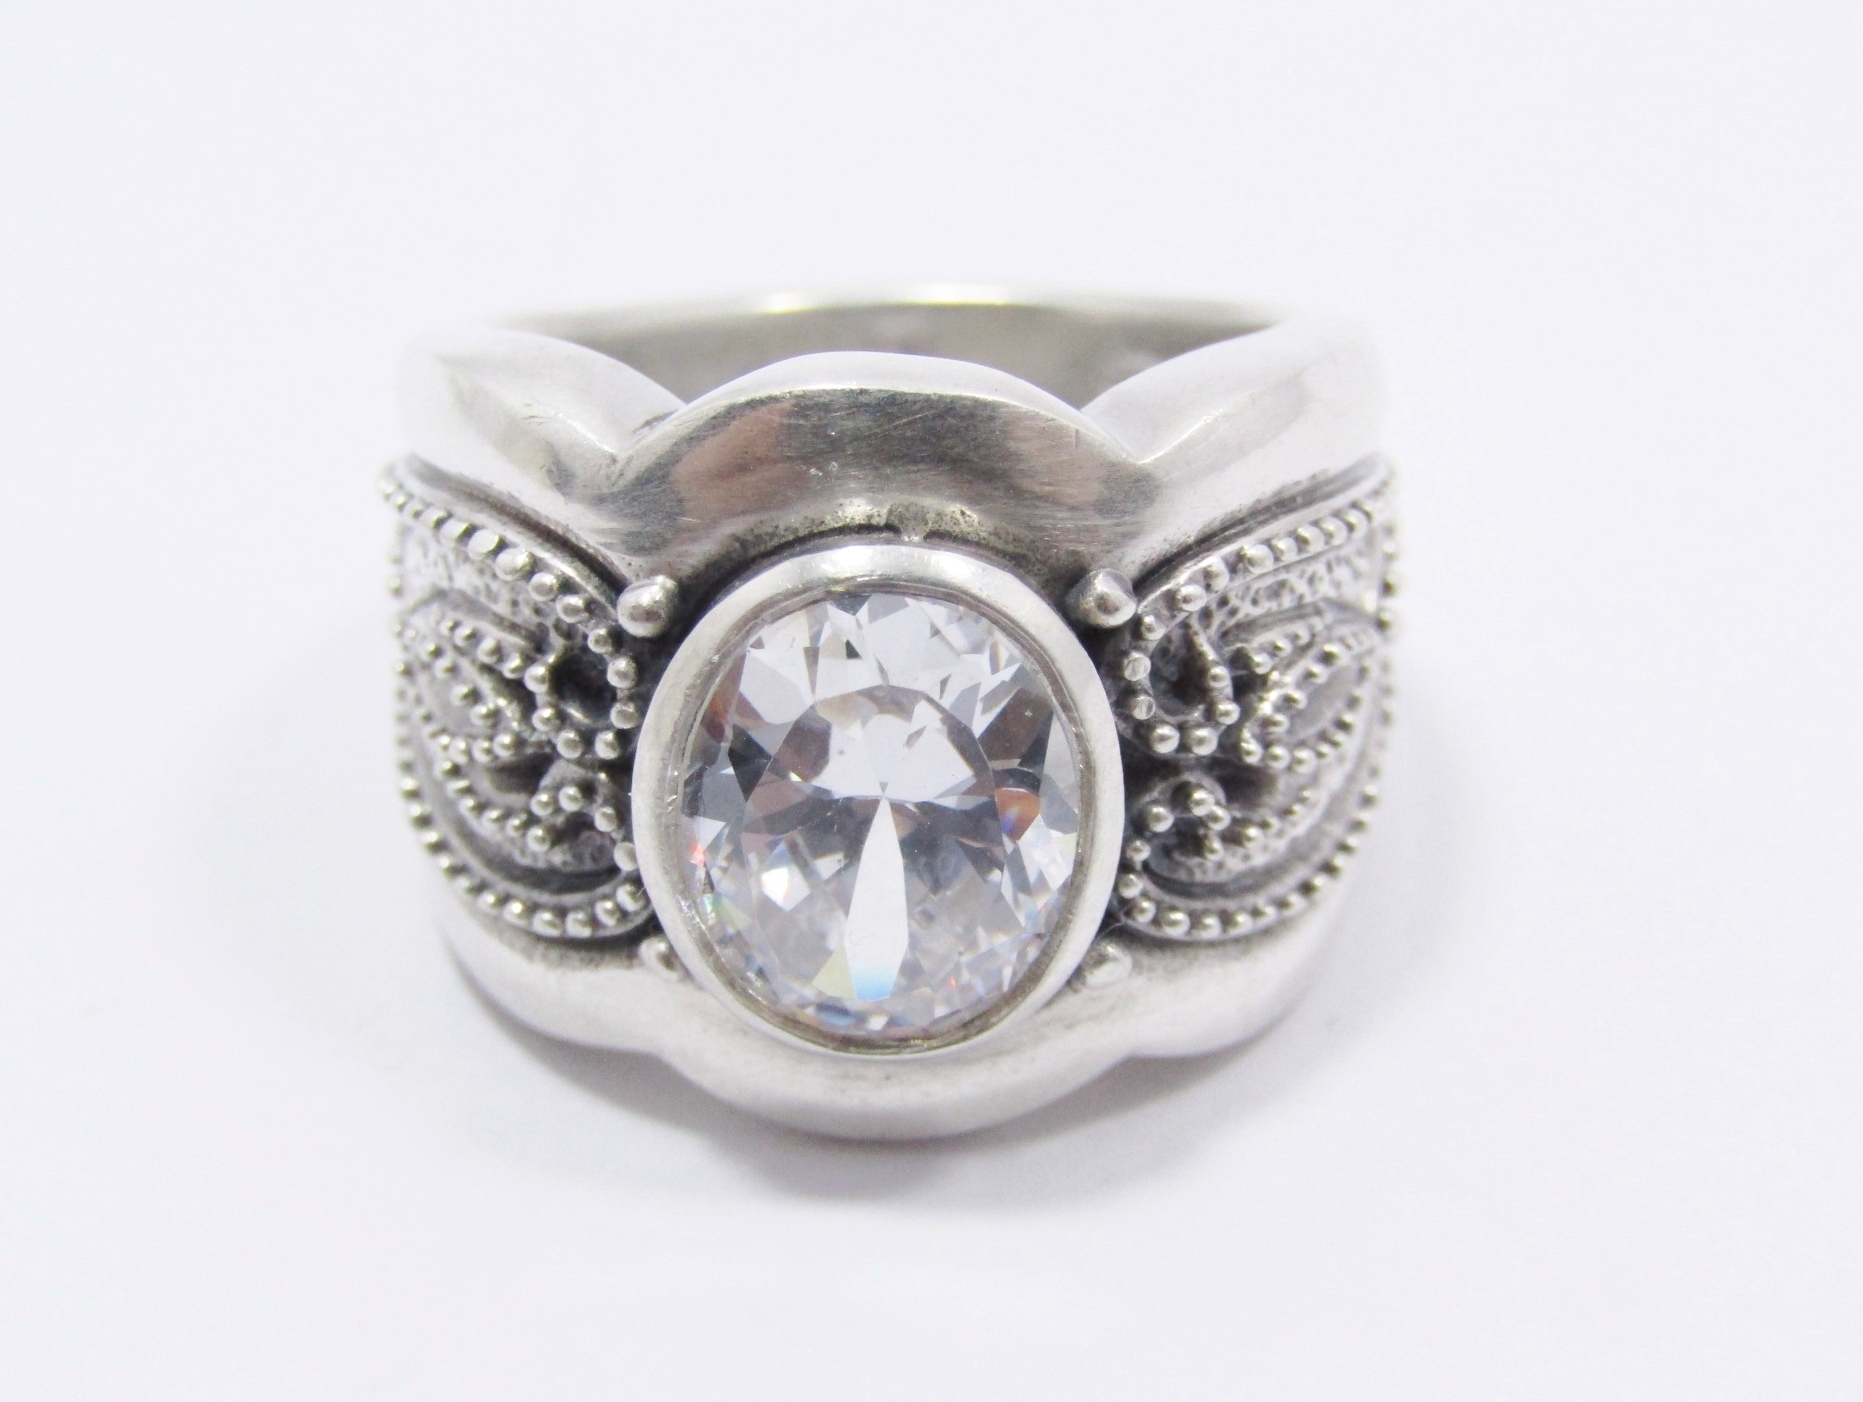 A Gorgeous Chunky Zirconia Ring in Sterling Silver